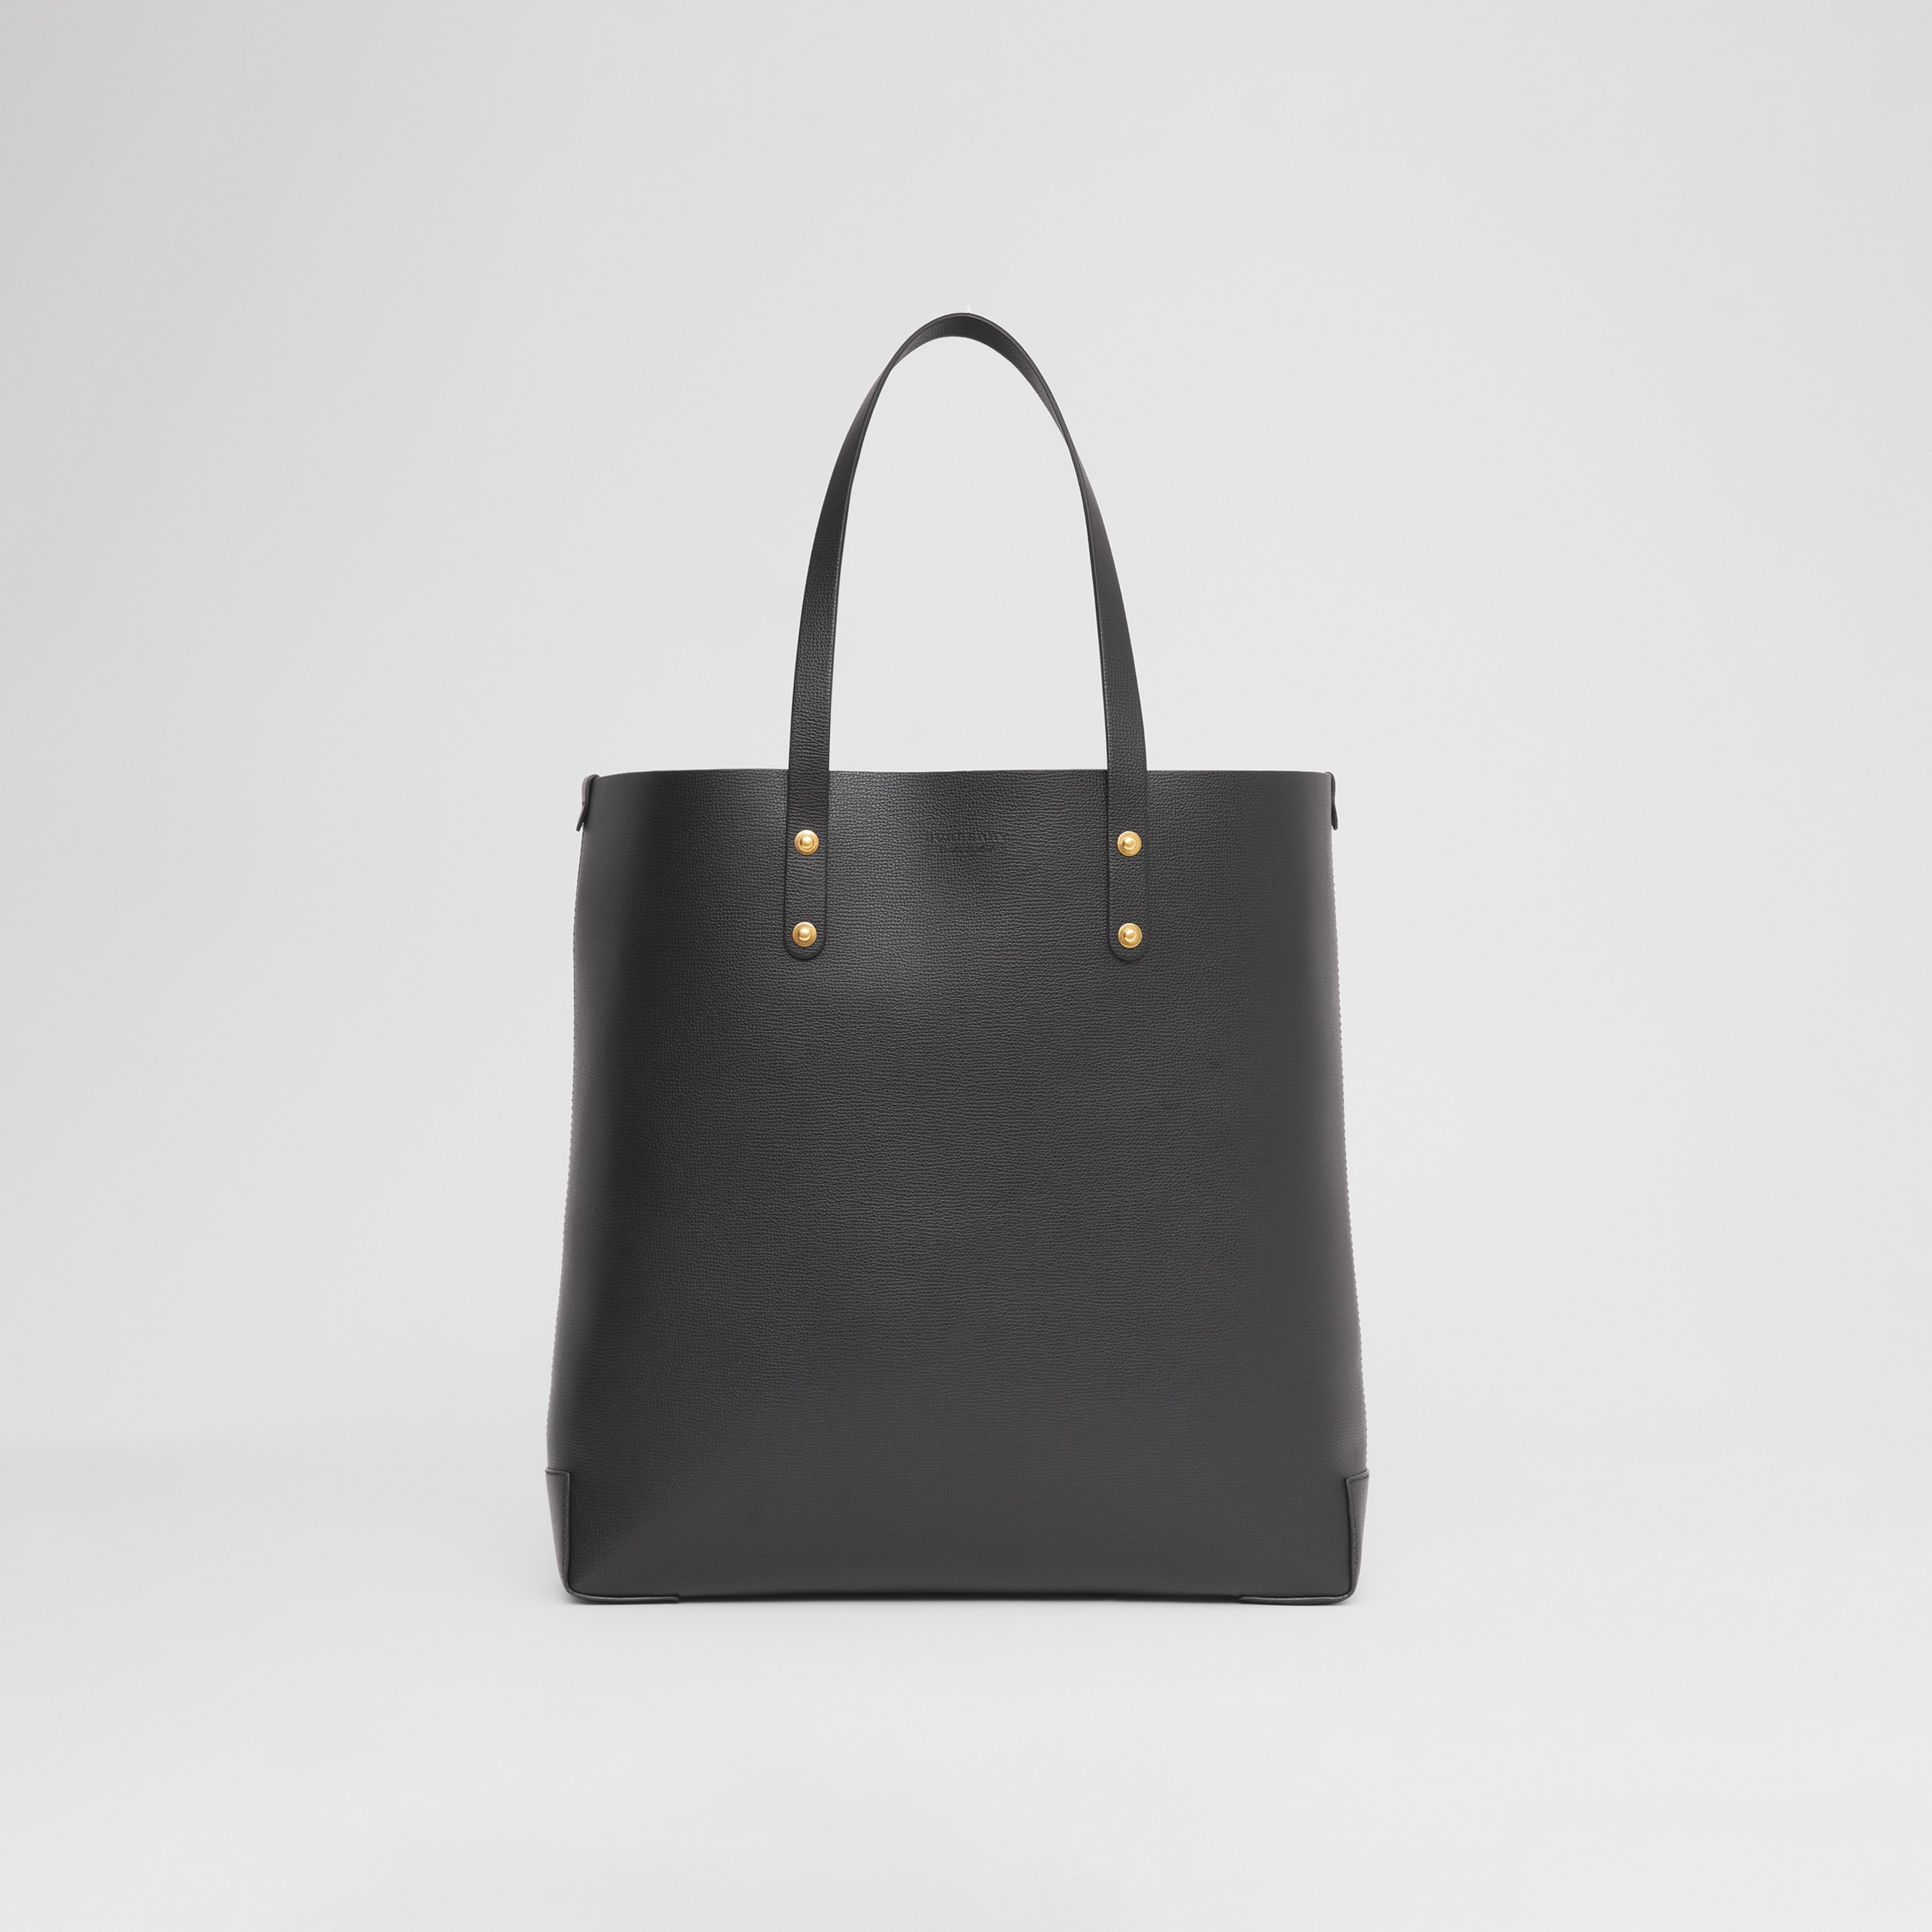 Large Grainy Leather Tote Bag in Black - Women | Burberry United States